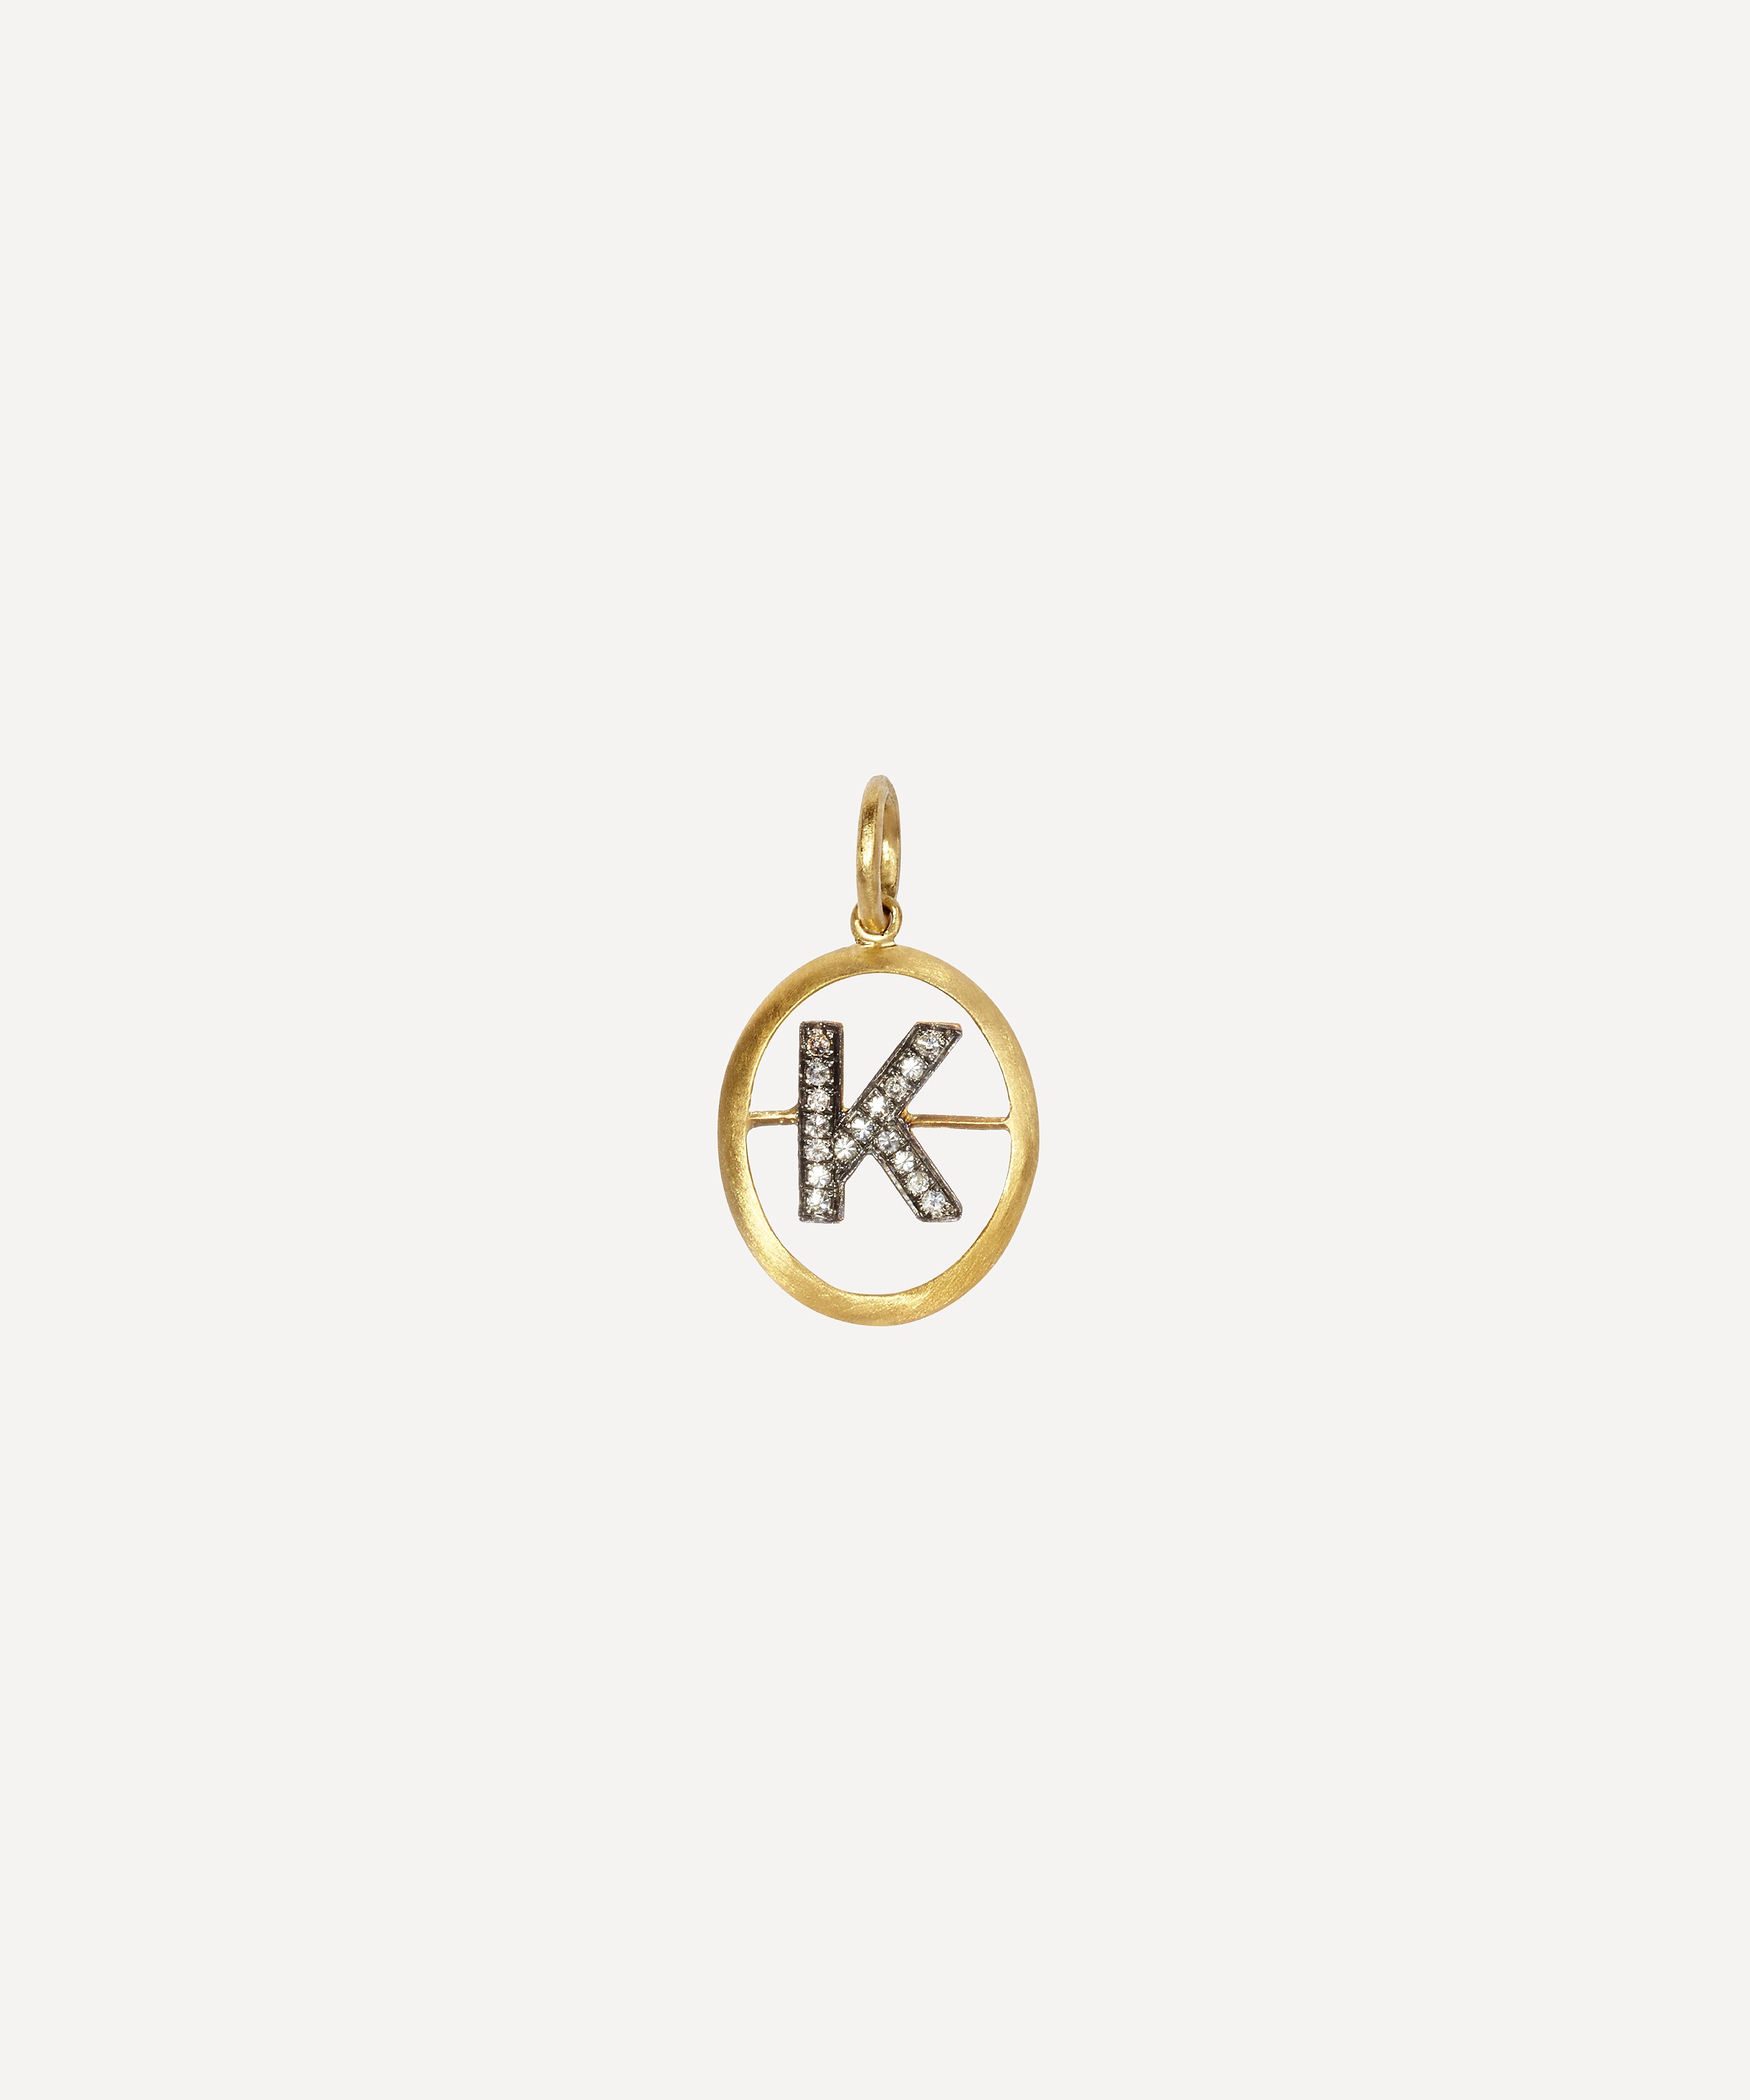 Initials 18ct Yellow Gold Diamond H Necklace